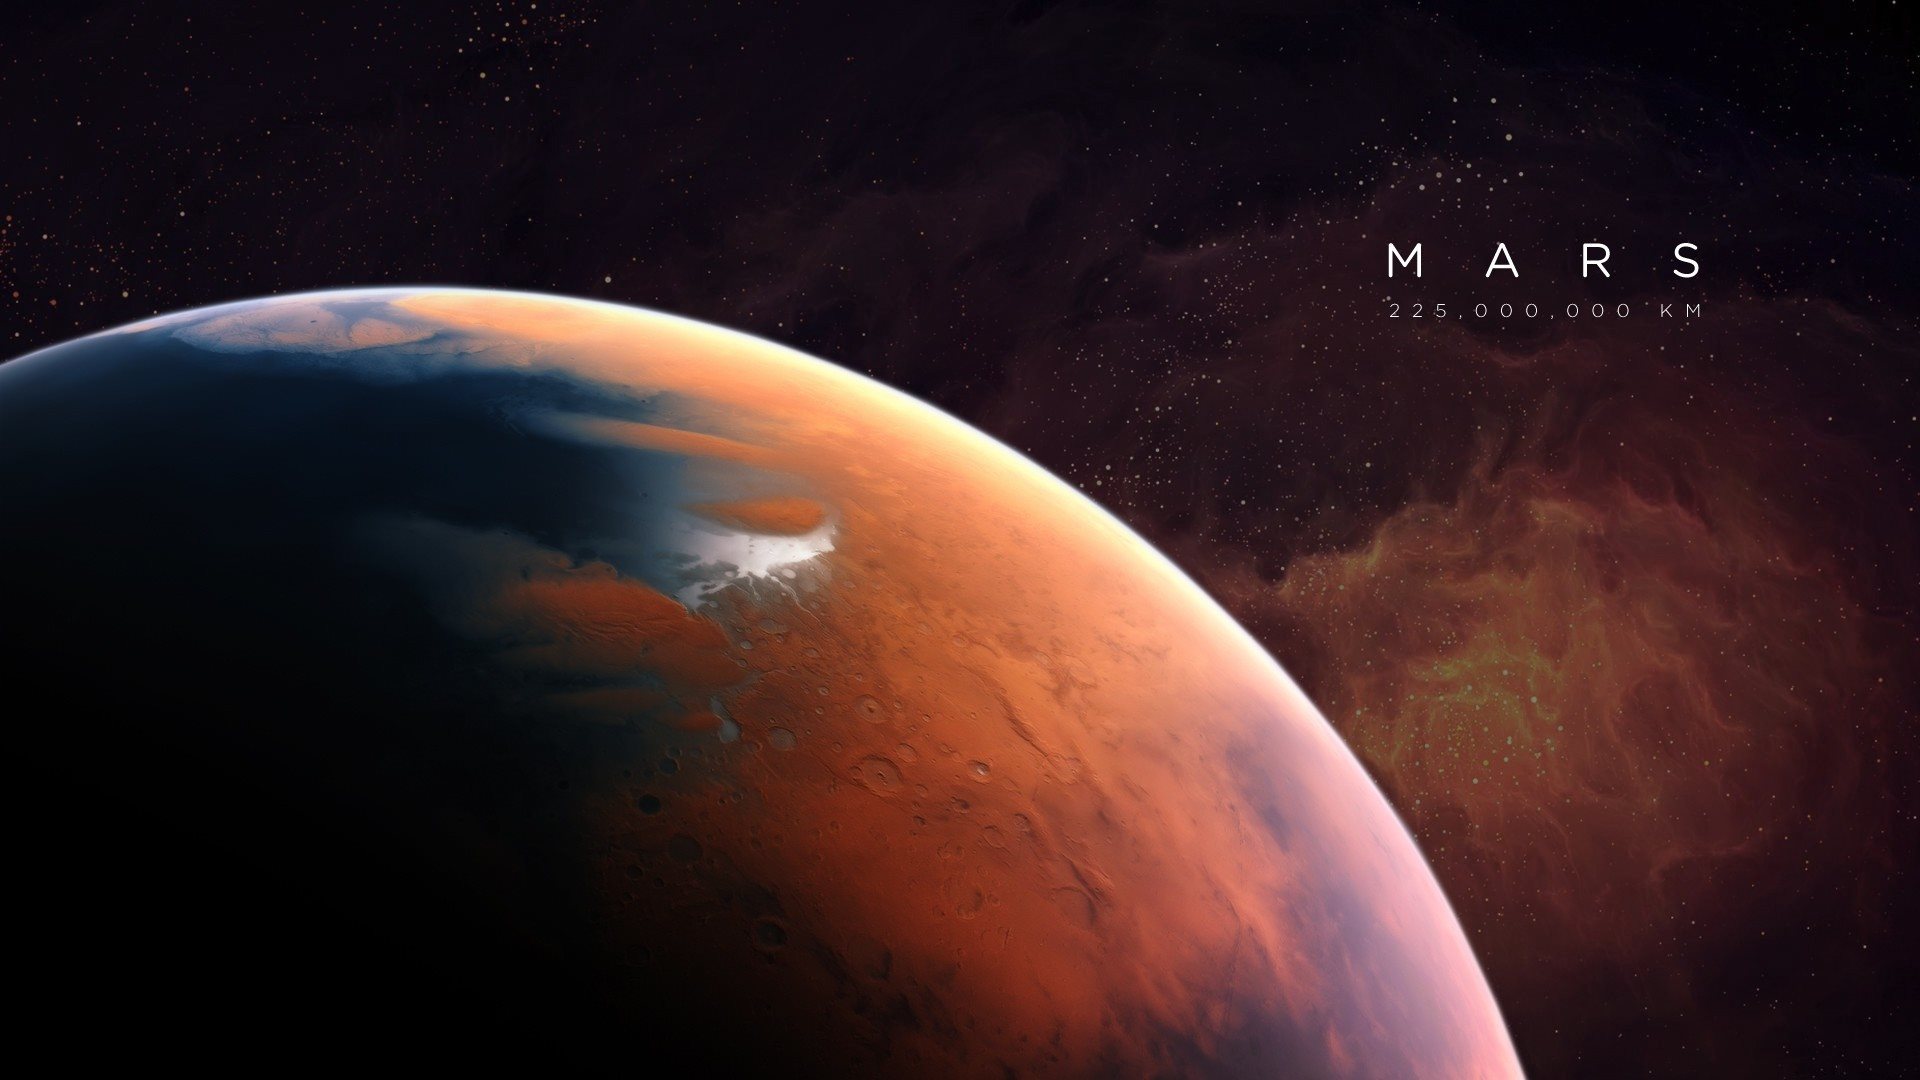 Wallpaper Pla Mars Solar System Distance To